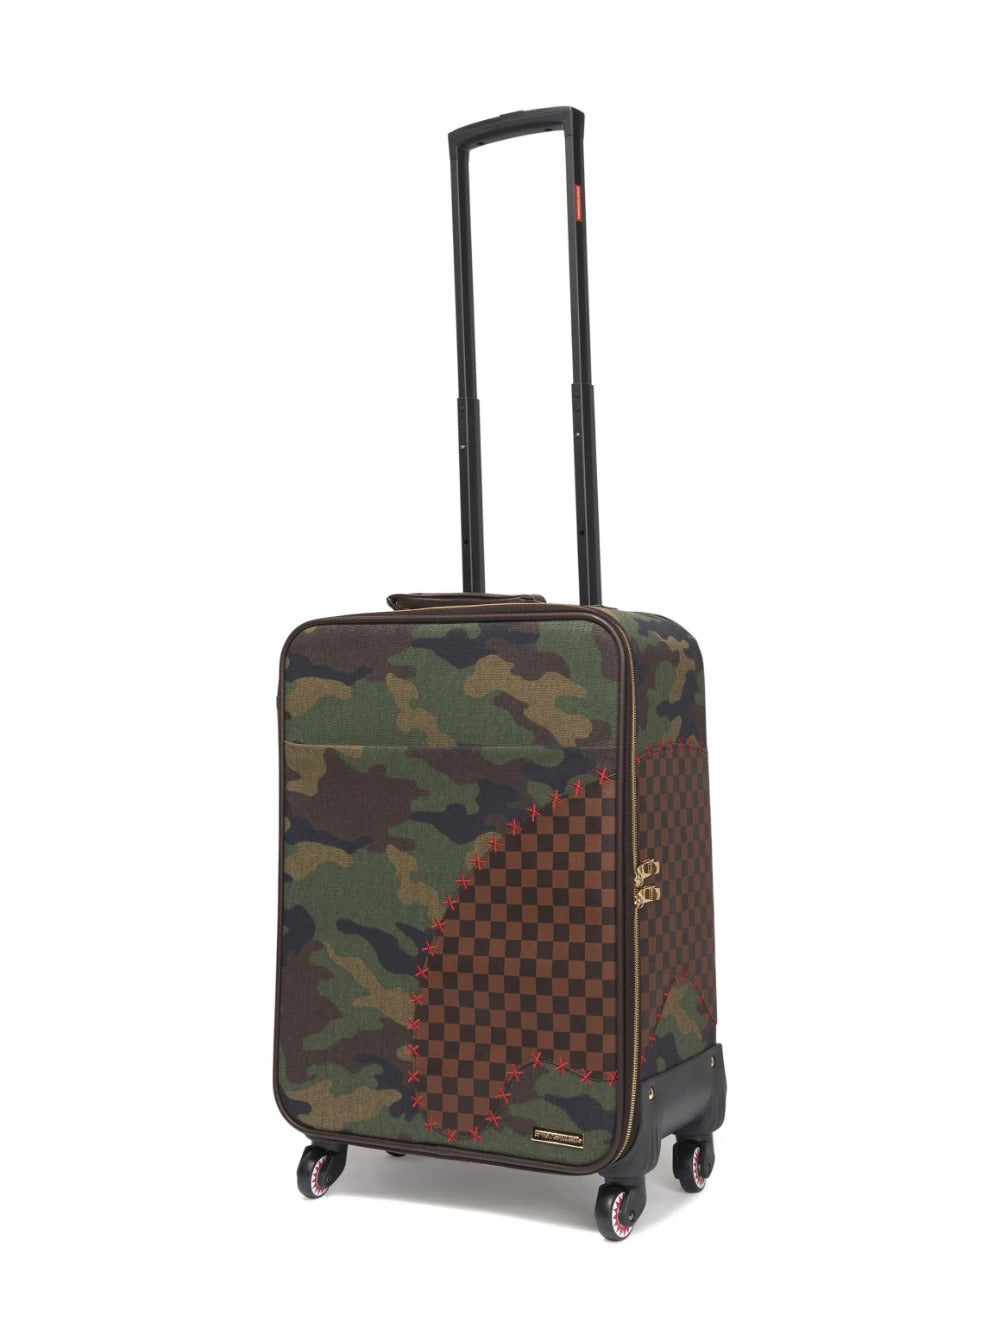 Louis Vuitton Unisex Adult Wheels/Rolling Travel Luggage for sale